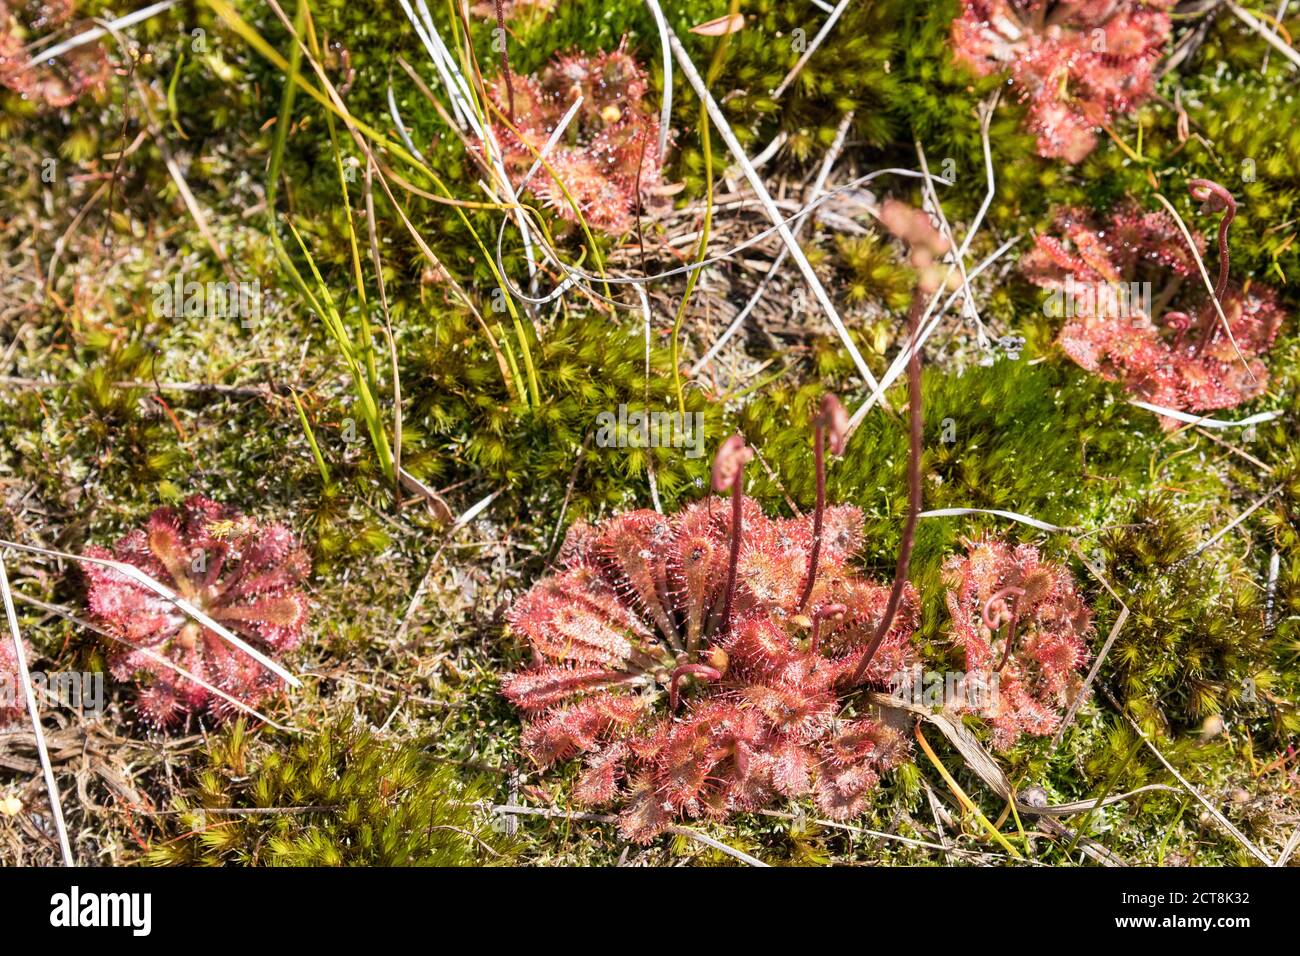 Sundew plant growing in damp boggy ground Stock Photo